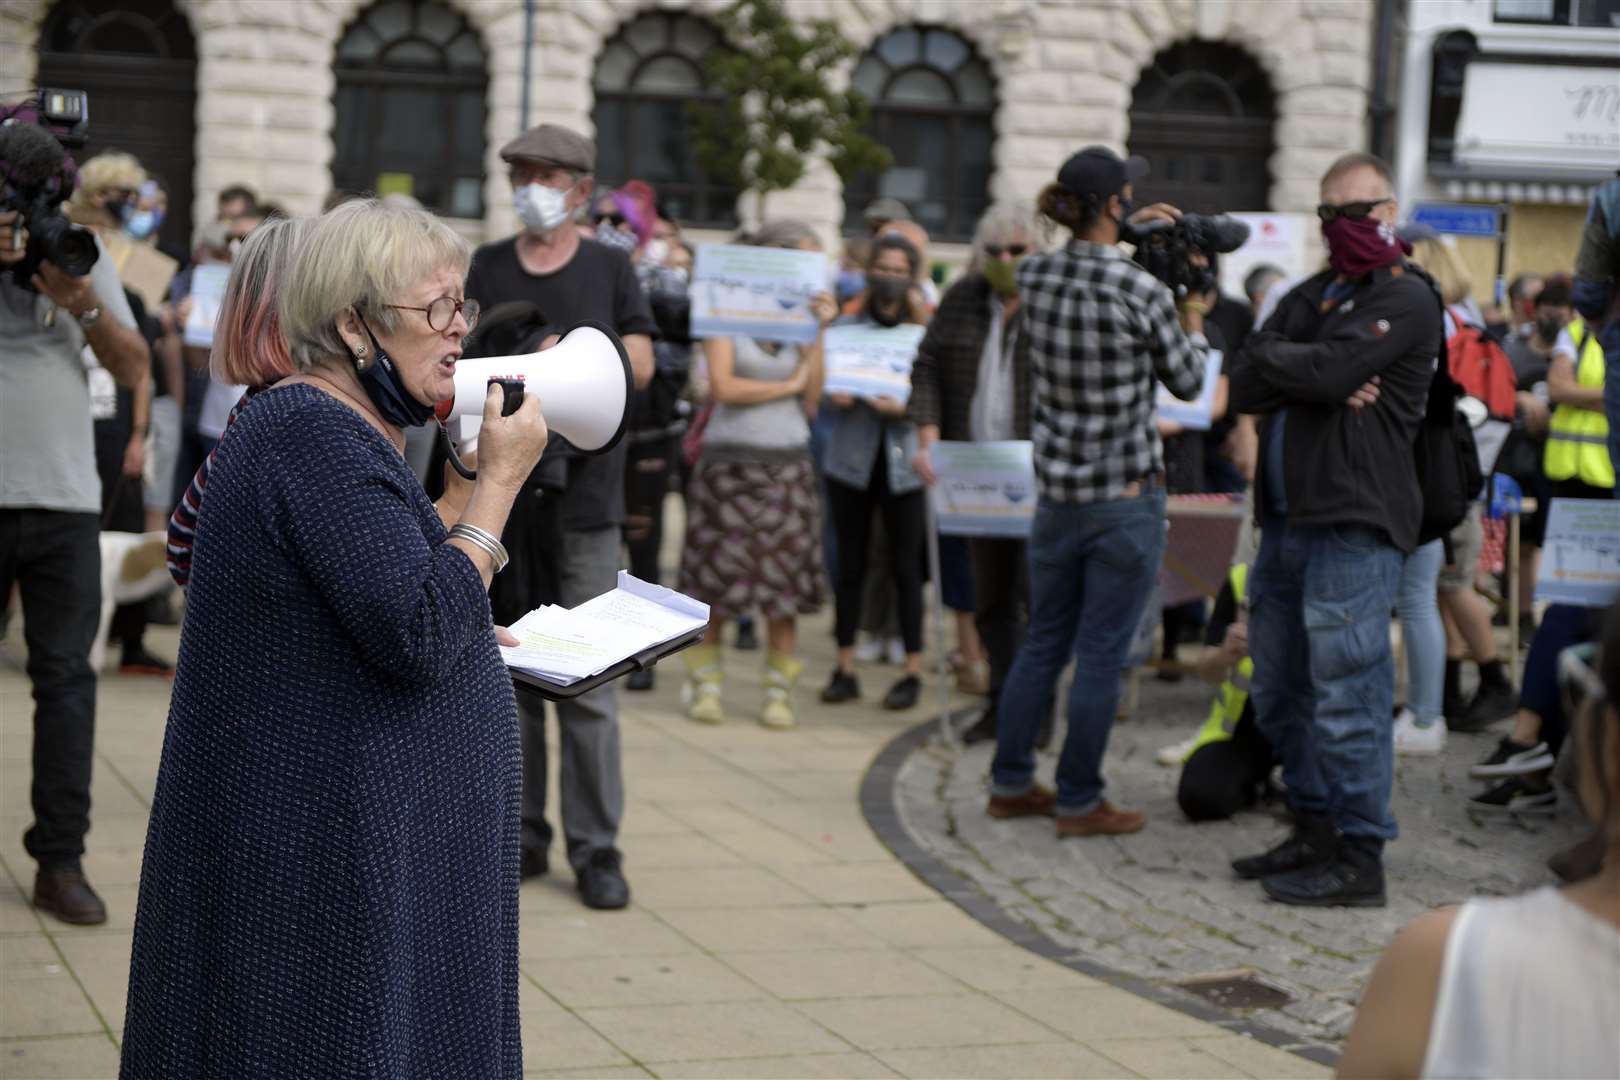 Kent Anti-Racism Network (KARN) organised a 'solidarity stand' in Market Square, Dover in support of migrants today. But far right groups then decided to hold their own protest. Picture: Barry Goodwin